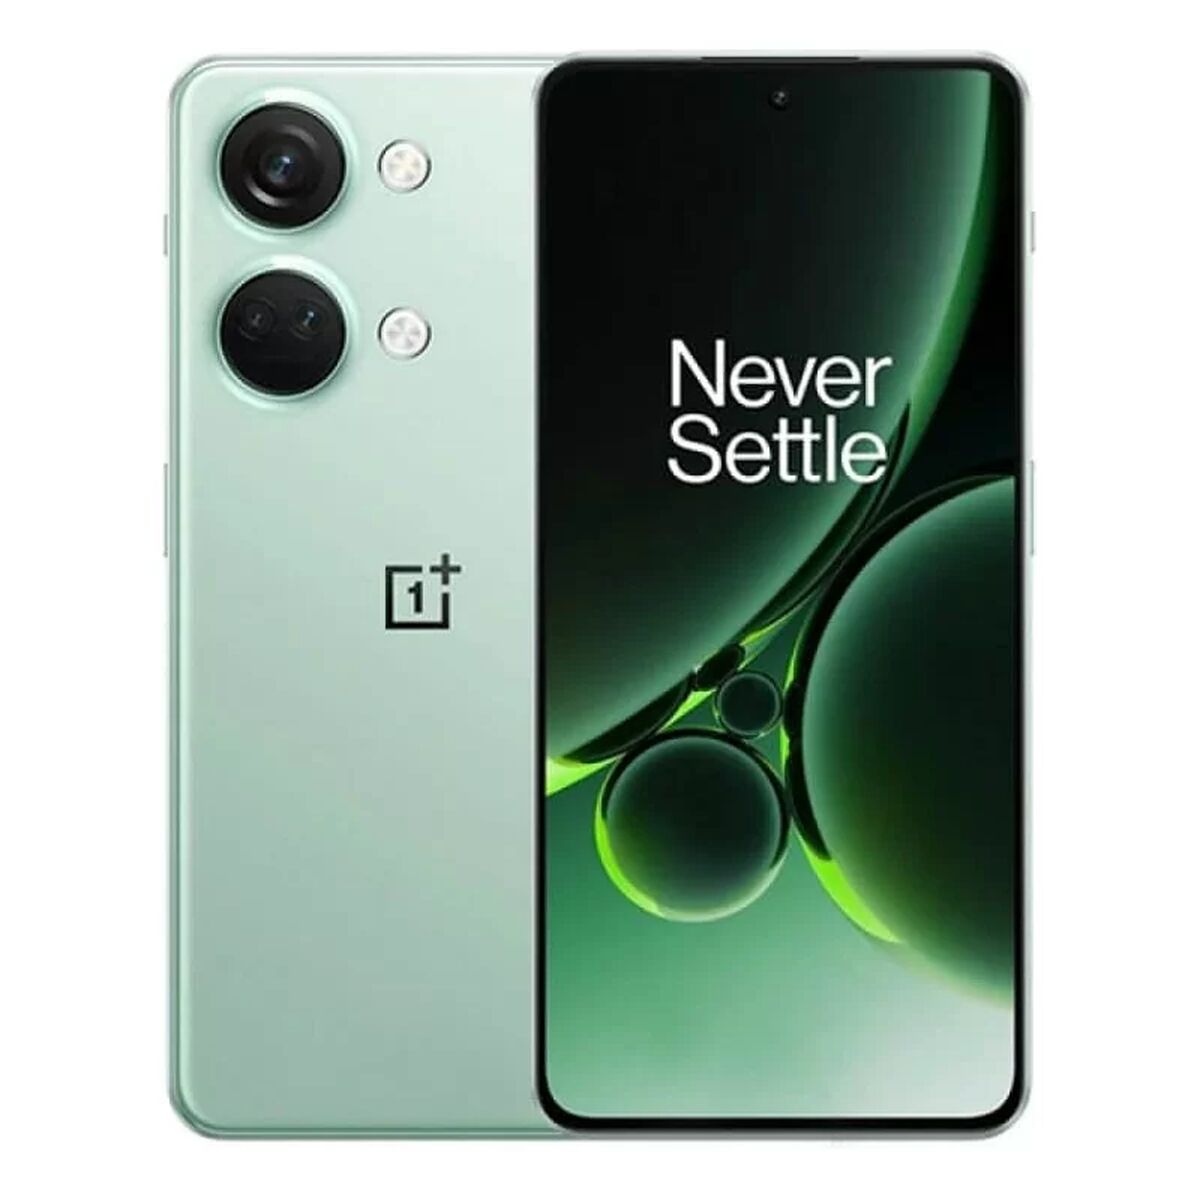 Smartphone OnePlus Nord 3 16 GB RAM Green 256 GB 6,74", OnePlus, Electronics, Mobile phones, smartphone-oneplus-nord-3-16-gb-ram-green-256-gb-6-74, :256 GB, :Green, :RAM 16 GB, Brand_OnePlus, category-reference-2609, category-reference-2617, category-reference-2618, category-reference-t-19653, category-reference-t-19894, Condition_NEW, office, Price_400 - 500, telephones & tablets, Teleworking, wifi y bluetooth, RiotNook